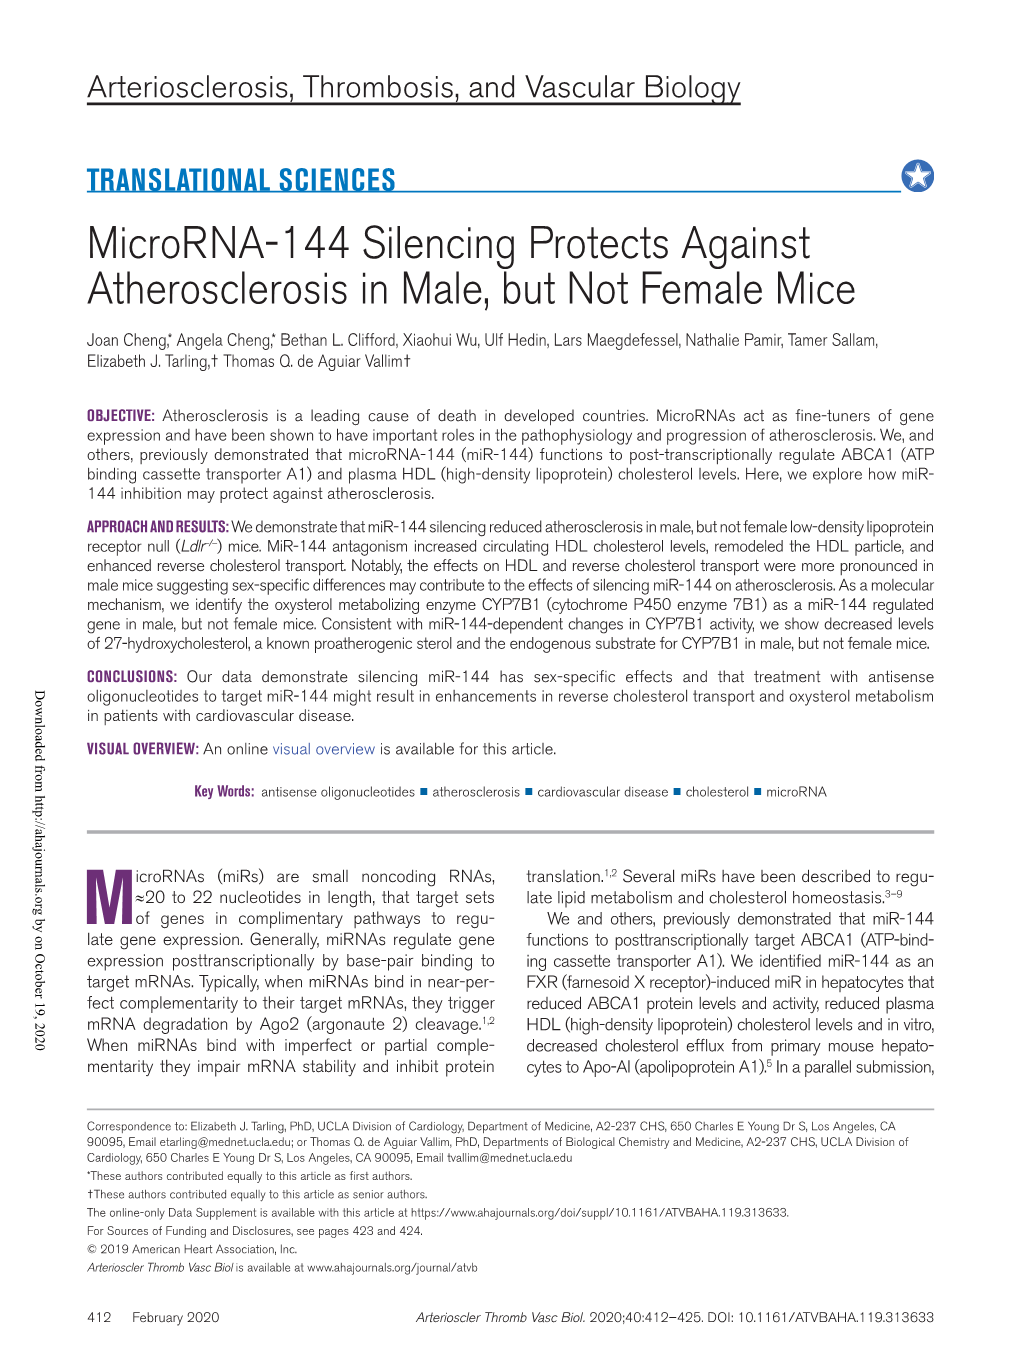 Microrna-144 Silencing Protects Against Atherosclerosis in Male, but Not Female Mice